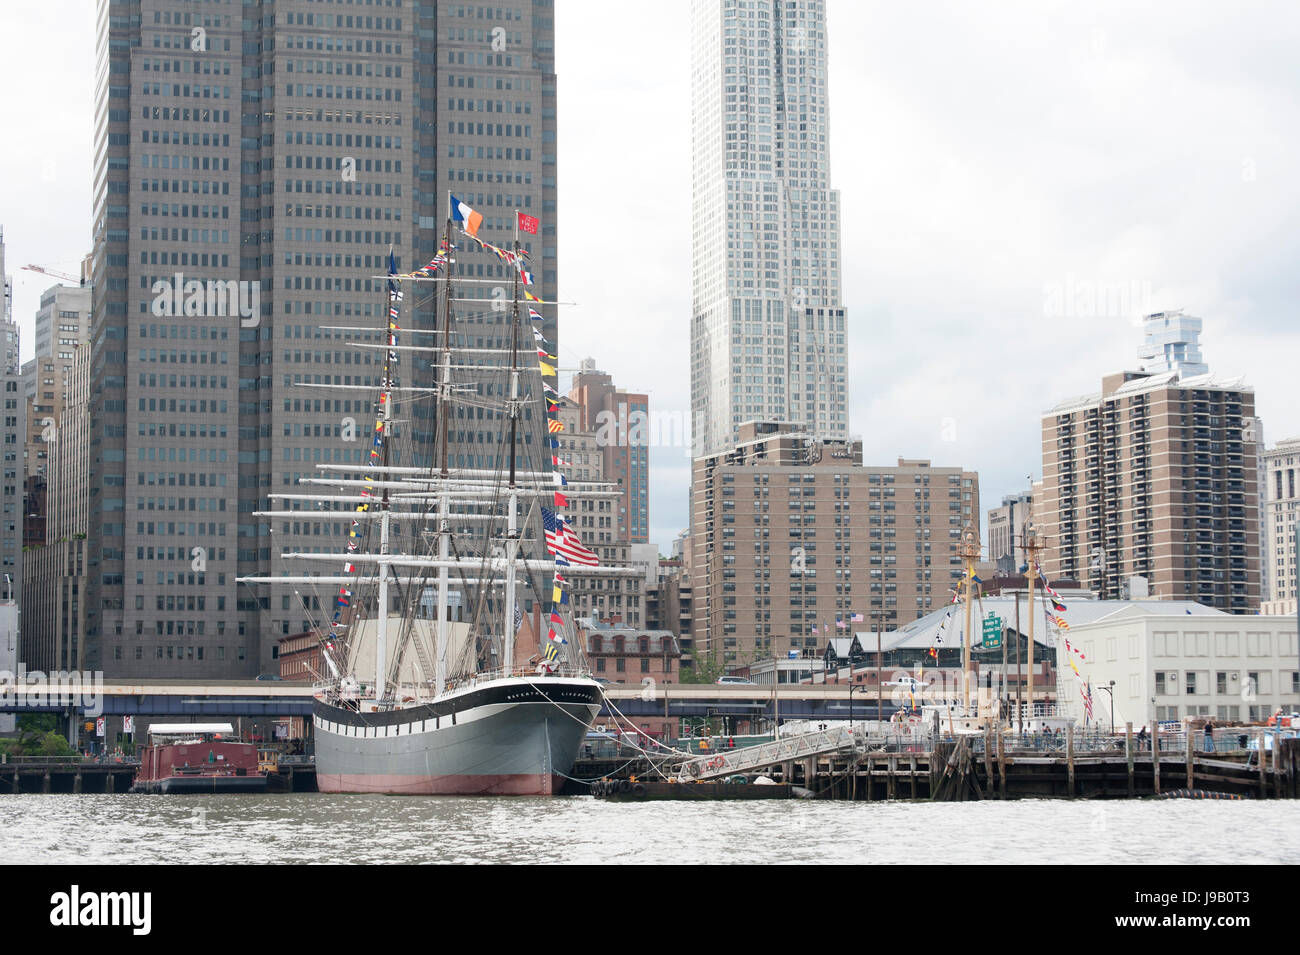 The South Street Seaport, with the South Street Seaport Museum’s 1885 cargo ship, Wavertree, berthed at Pier 16.  May 27, 2017 Stock Photo